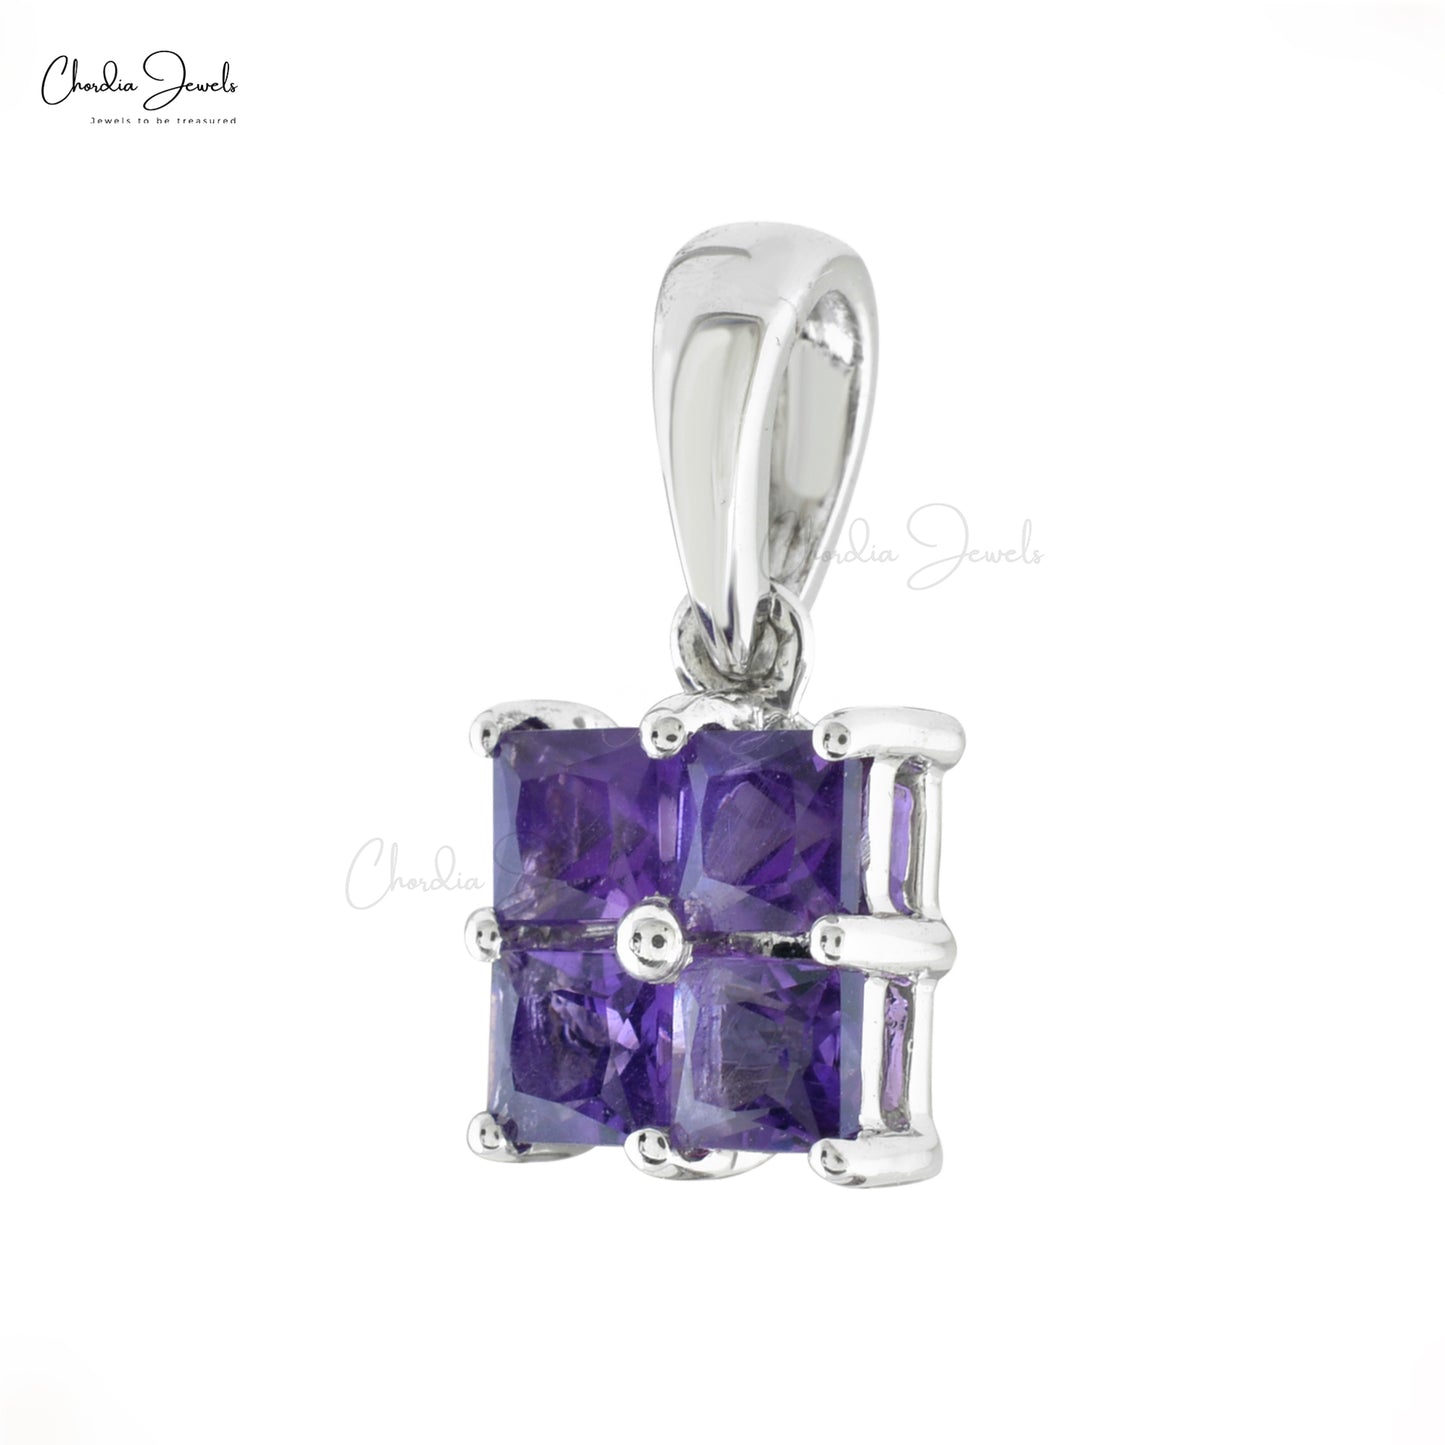 Modern Luxury Cluster Pendant For Women in 14k Solid White Gold 3mm Square Cut Genuine Purple Amethyst Pendant Necklace Hallmarked Jewelry For Gift